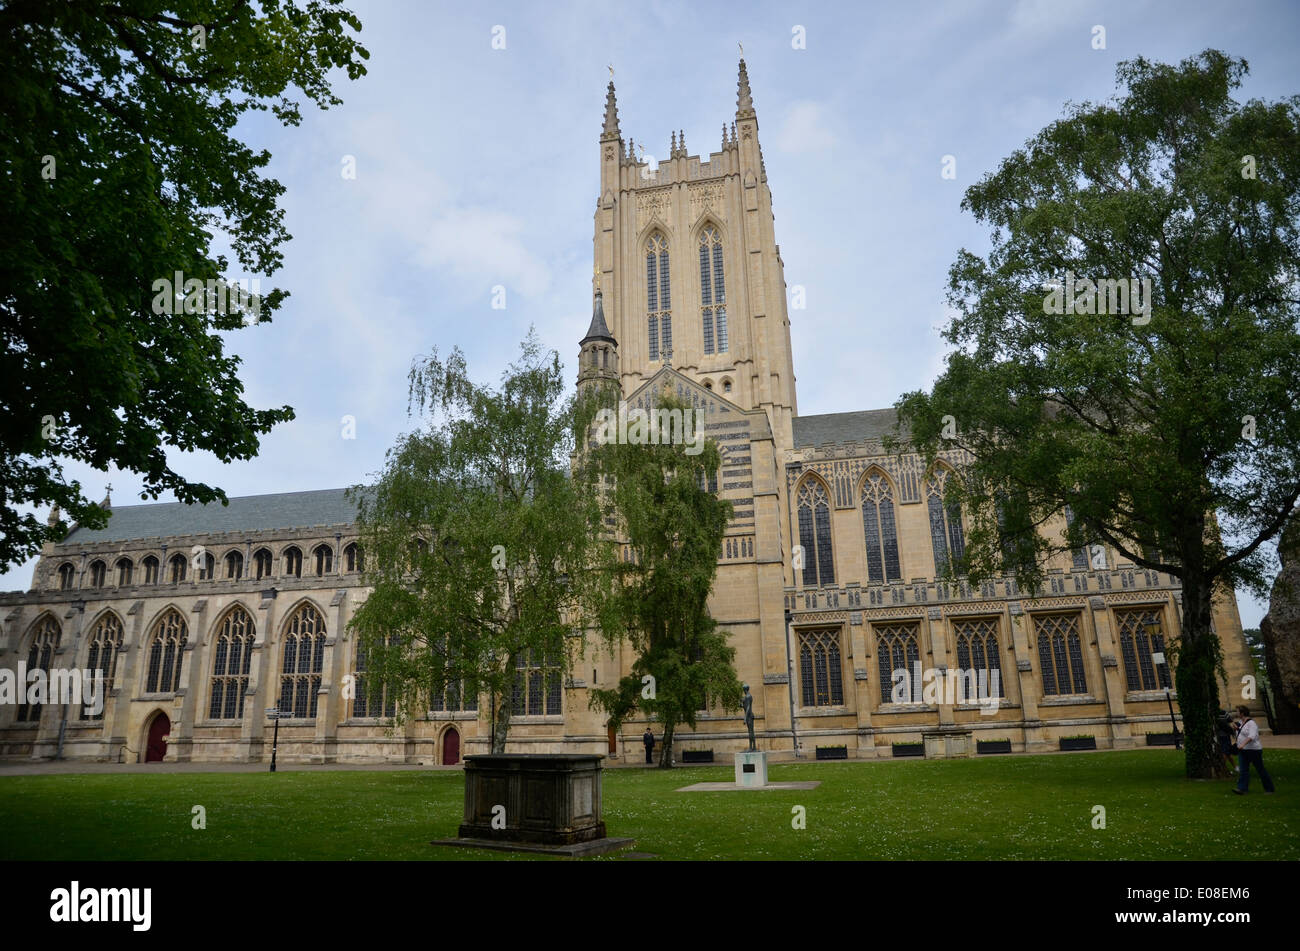 St Edmundsbury Cathedral in Bury St Edmunds, Suffolk, Inghilterra Foto Stock